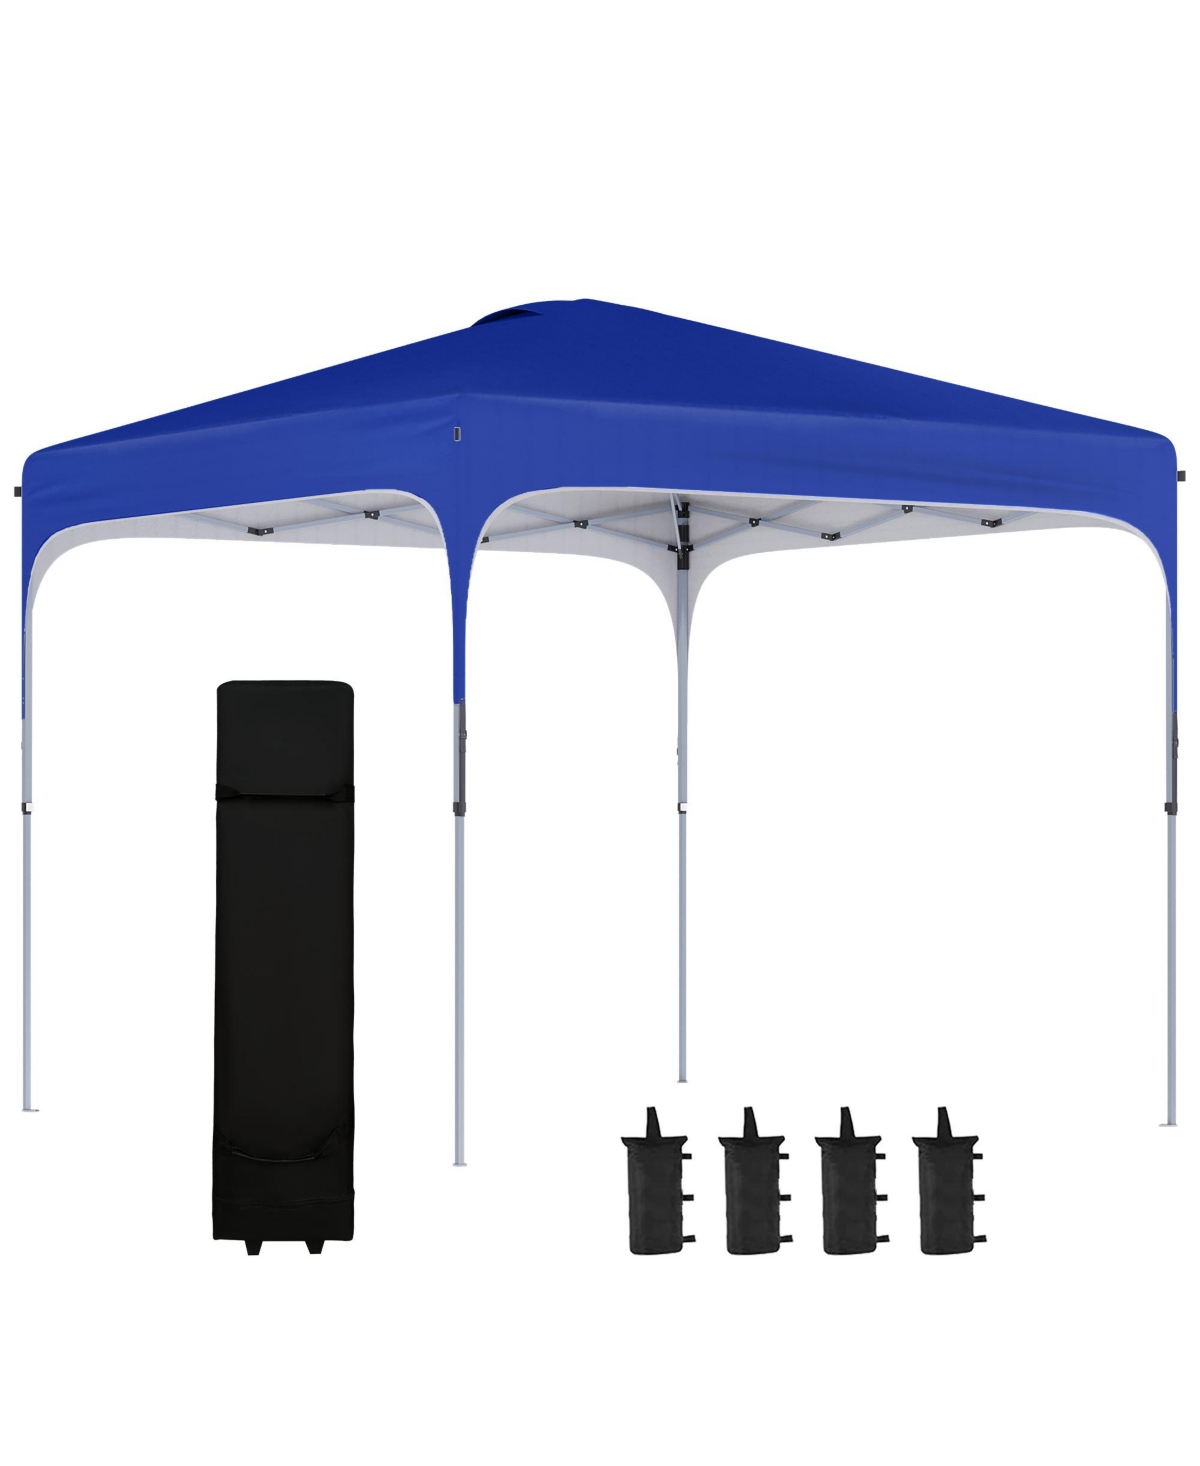 10' x 10' Pop Up Canopy with Adjustable Height, Foldable Gazebo Tent with Carry Bag with Wheels and 4 Leg Weight Bags for Outdoor Garden Pati